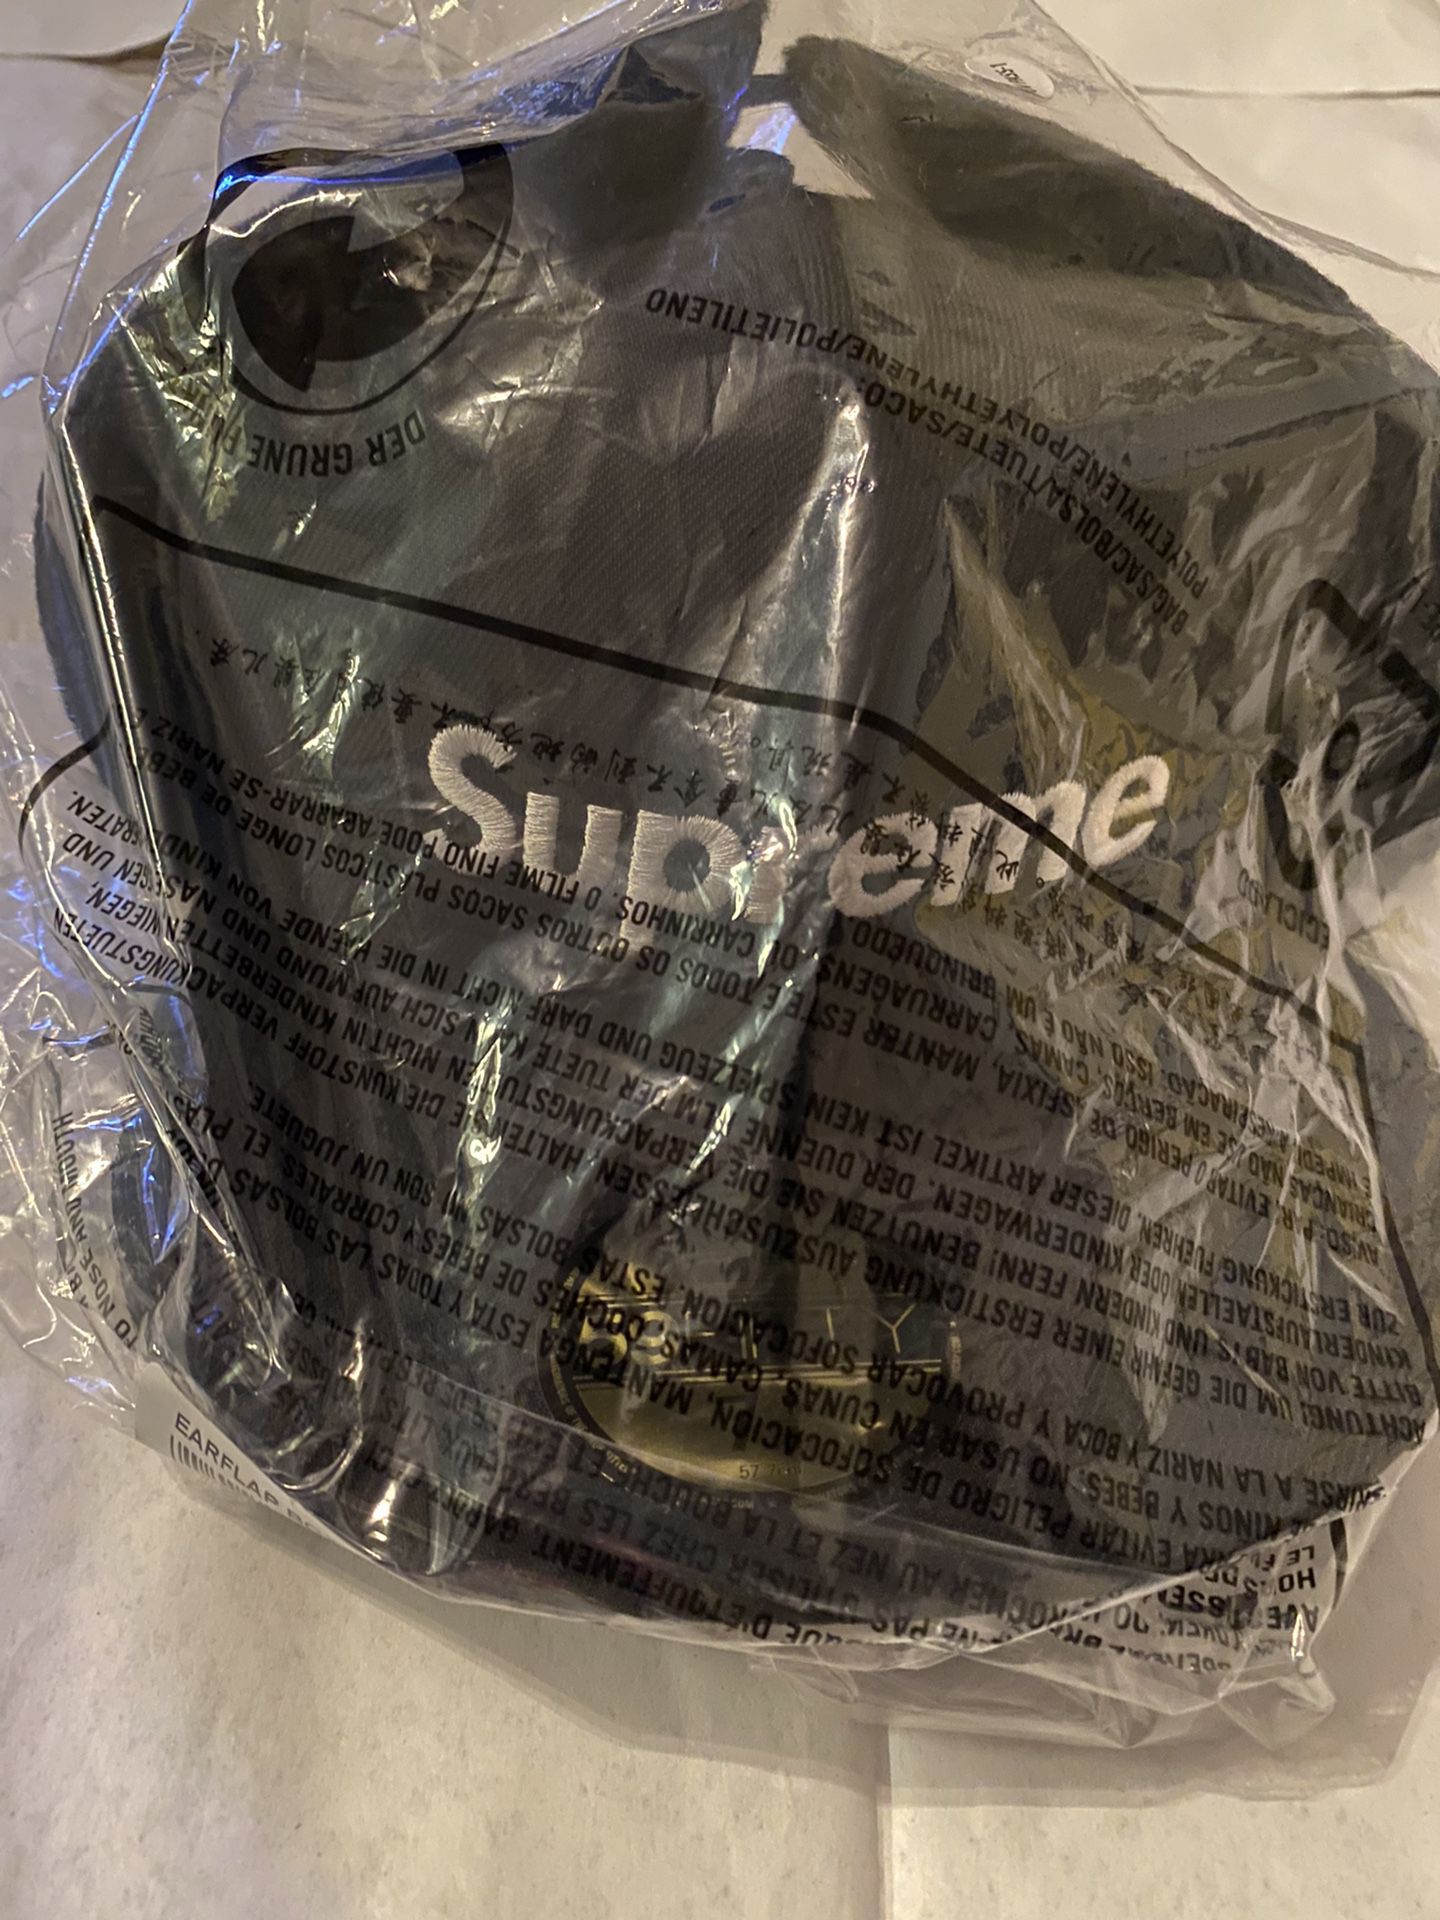 BRAND NEW SUPREME/NEW ERA “EARFLAP BOX LOGO BLACK” FITTED FOR SALE!!! SIZE 7/14 $80